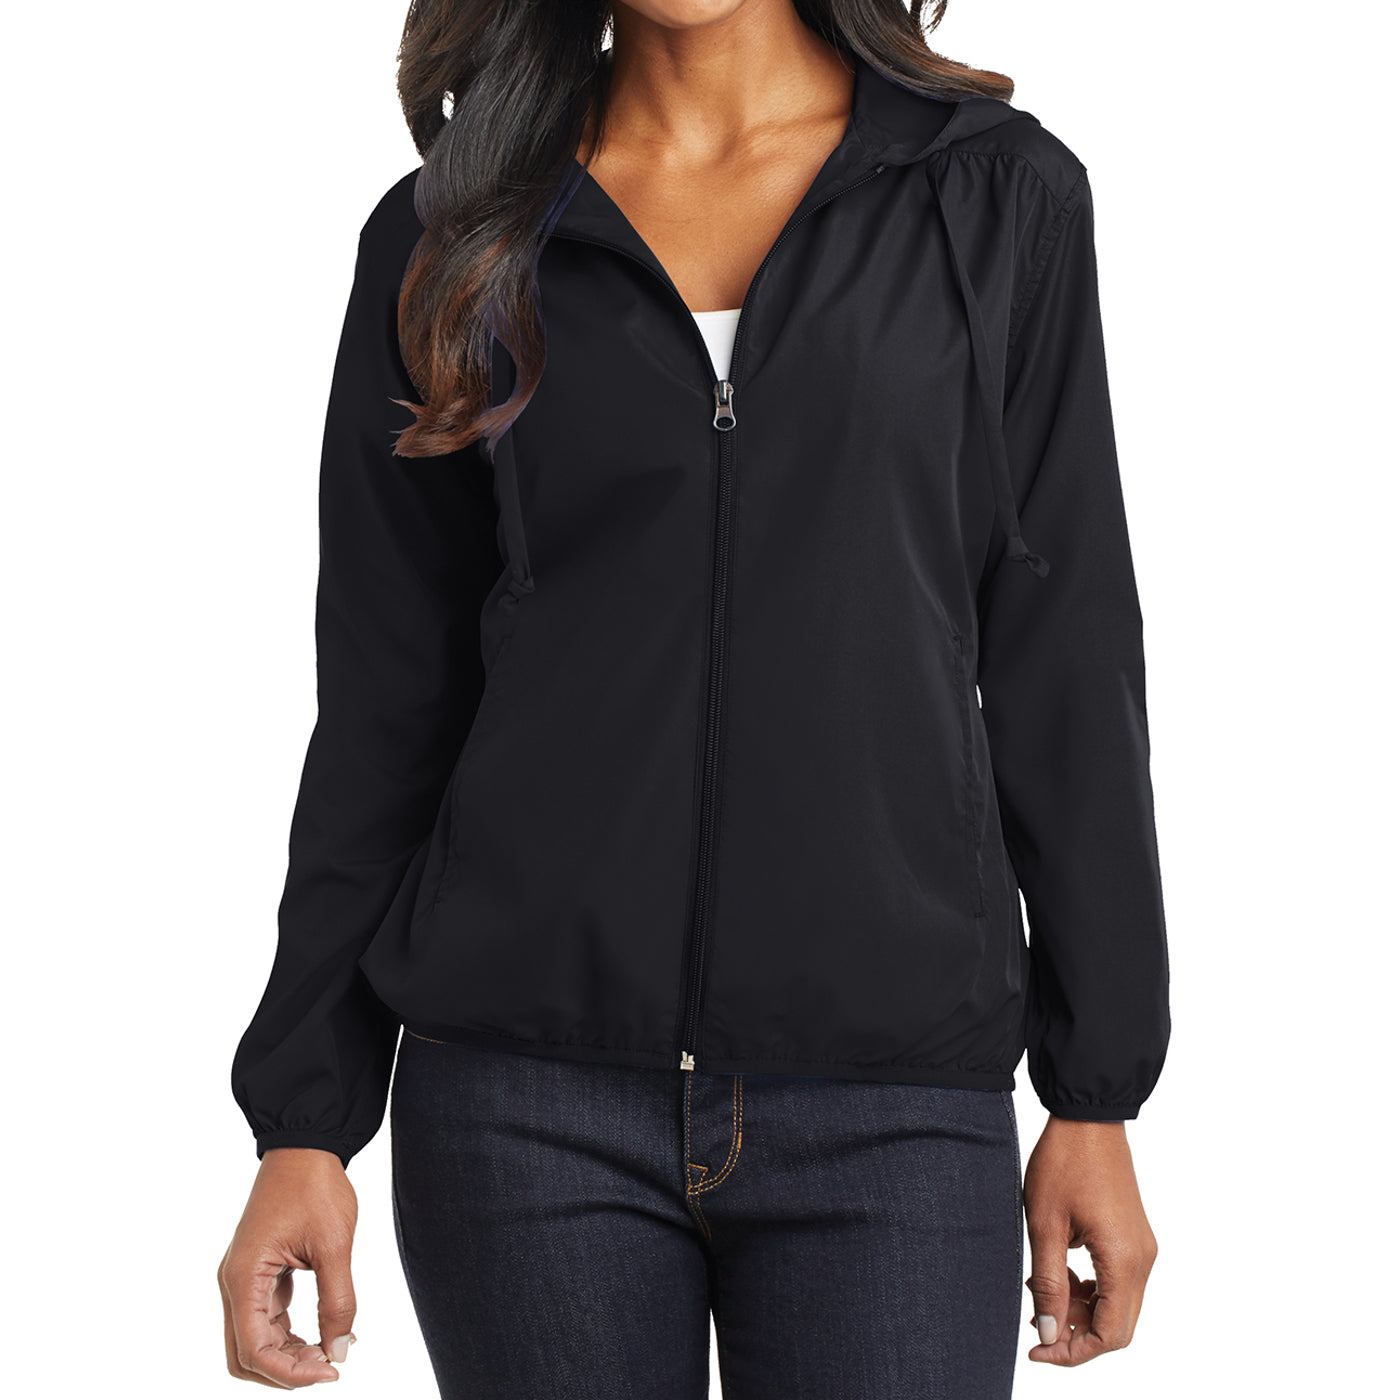 Women's Hooded Essential Jacket - Black - Front